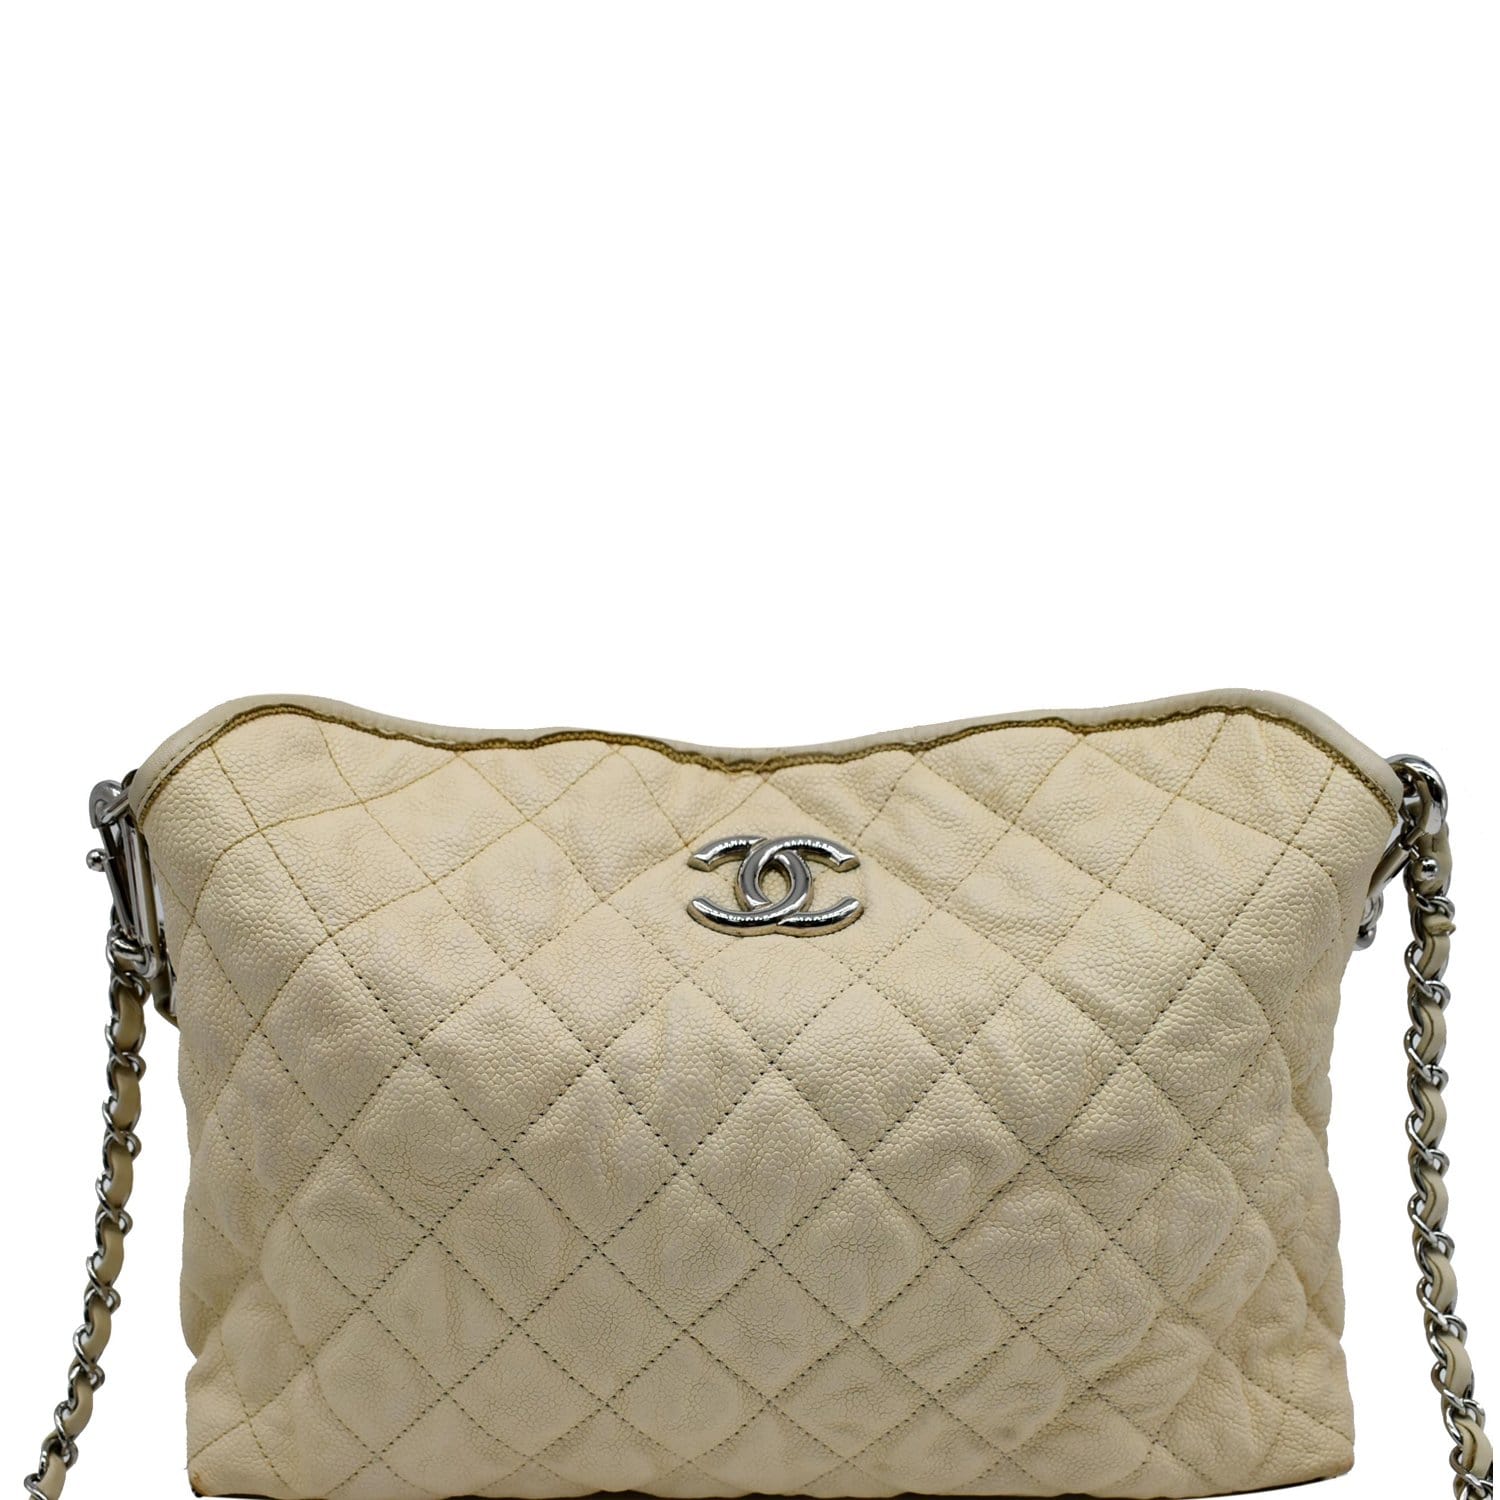 Vintage Chanel Quilted Suede Hobo Bag